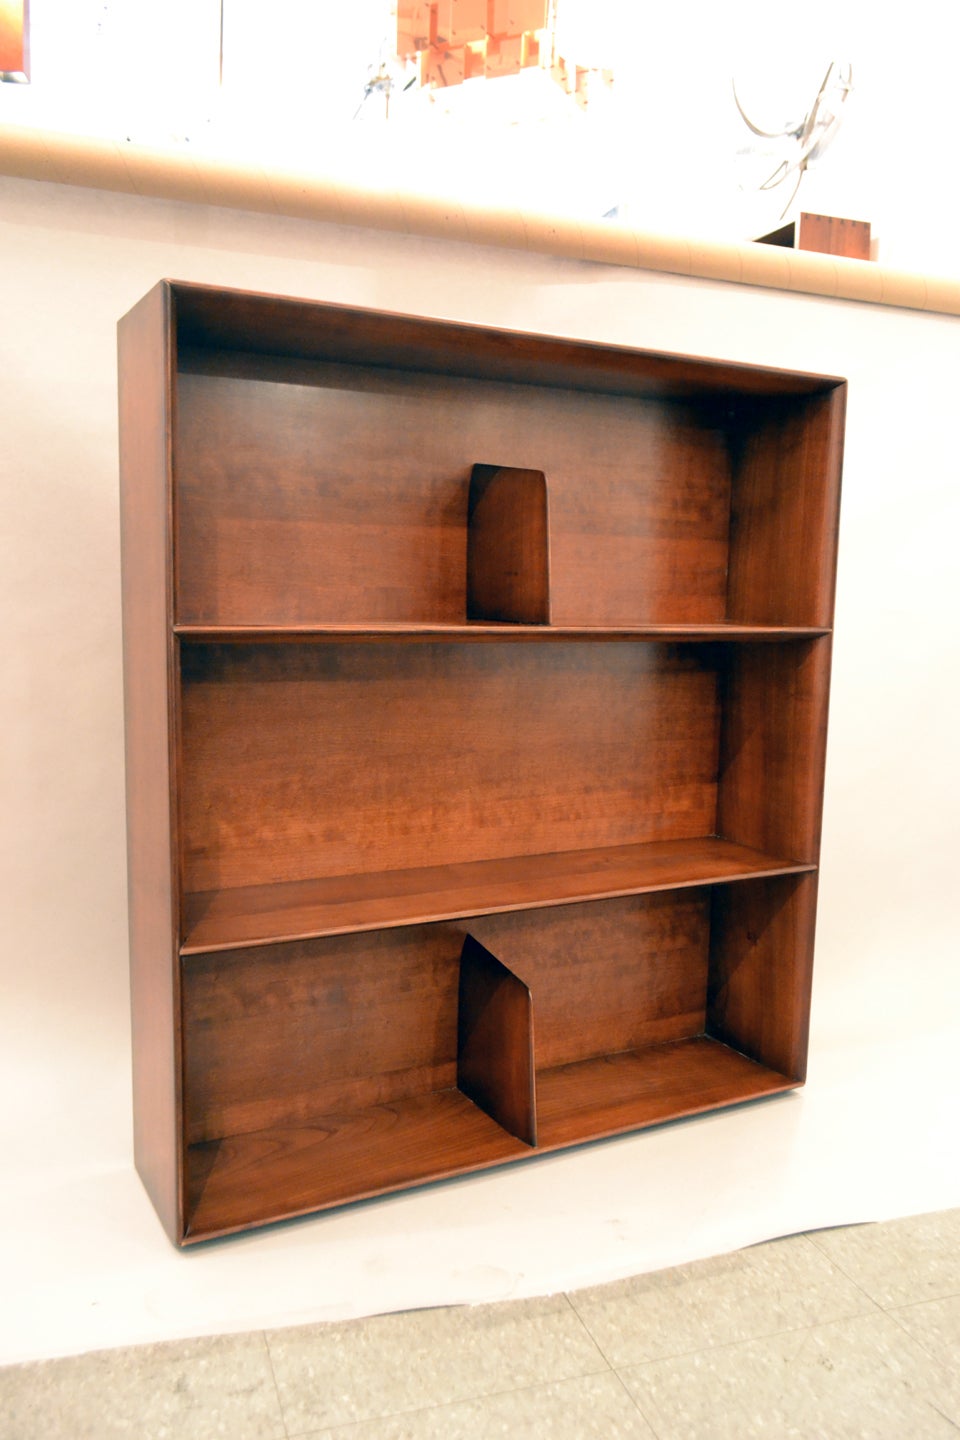 A wonderful modernist bookcase in walnut by Gio Ponti, Italy. The bookcase is designed to be mounted on the wall. The top and bottom shelves are divided by sculpted slivers of walnut.